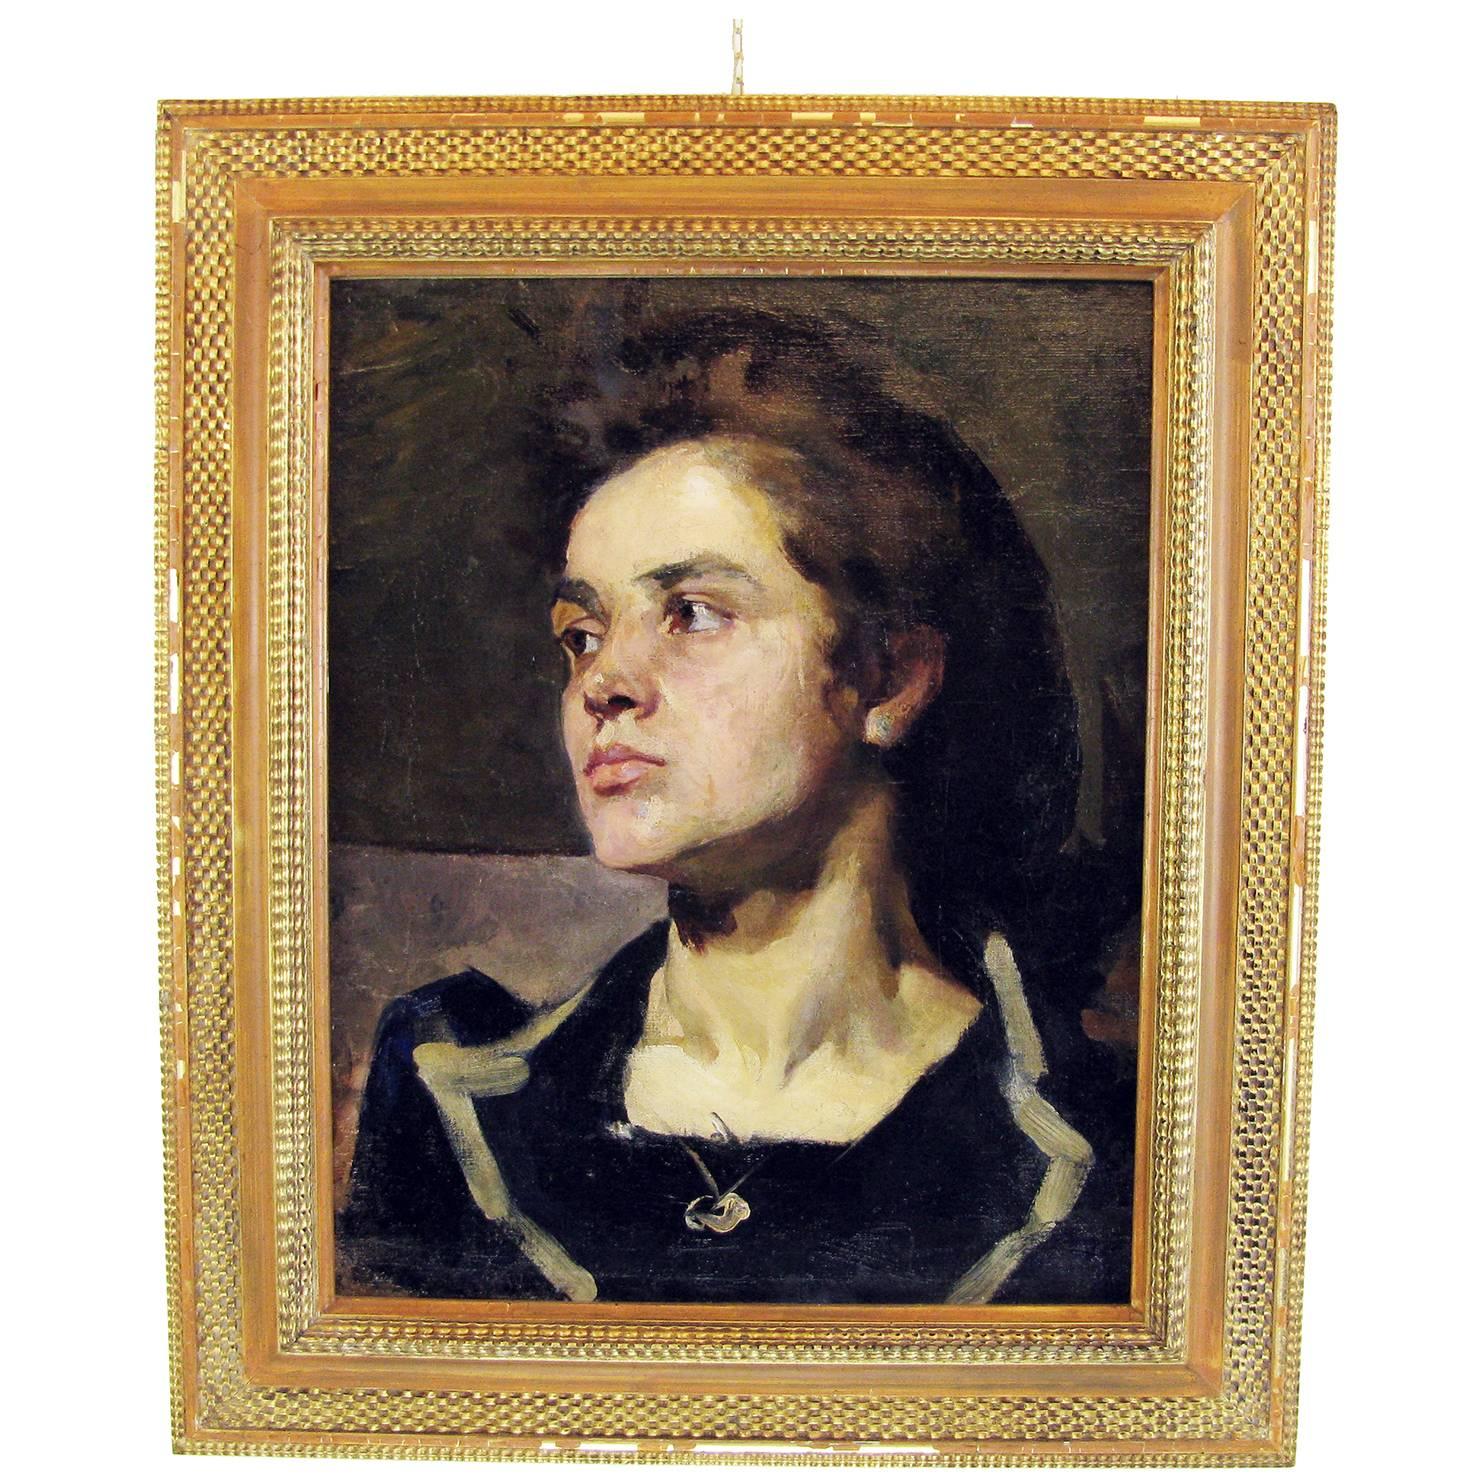 19th Century Portrait of a Young Woman by Italian Painter Cesare Tallone